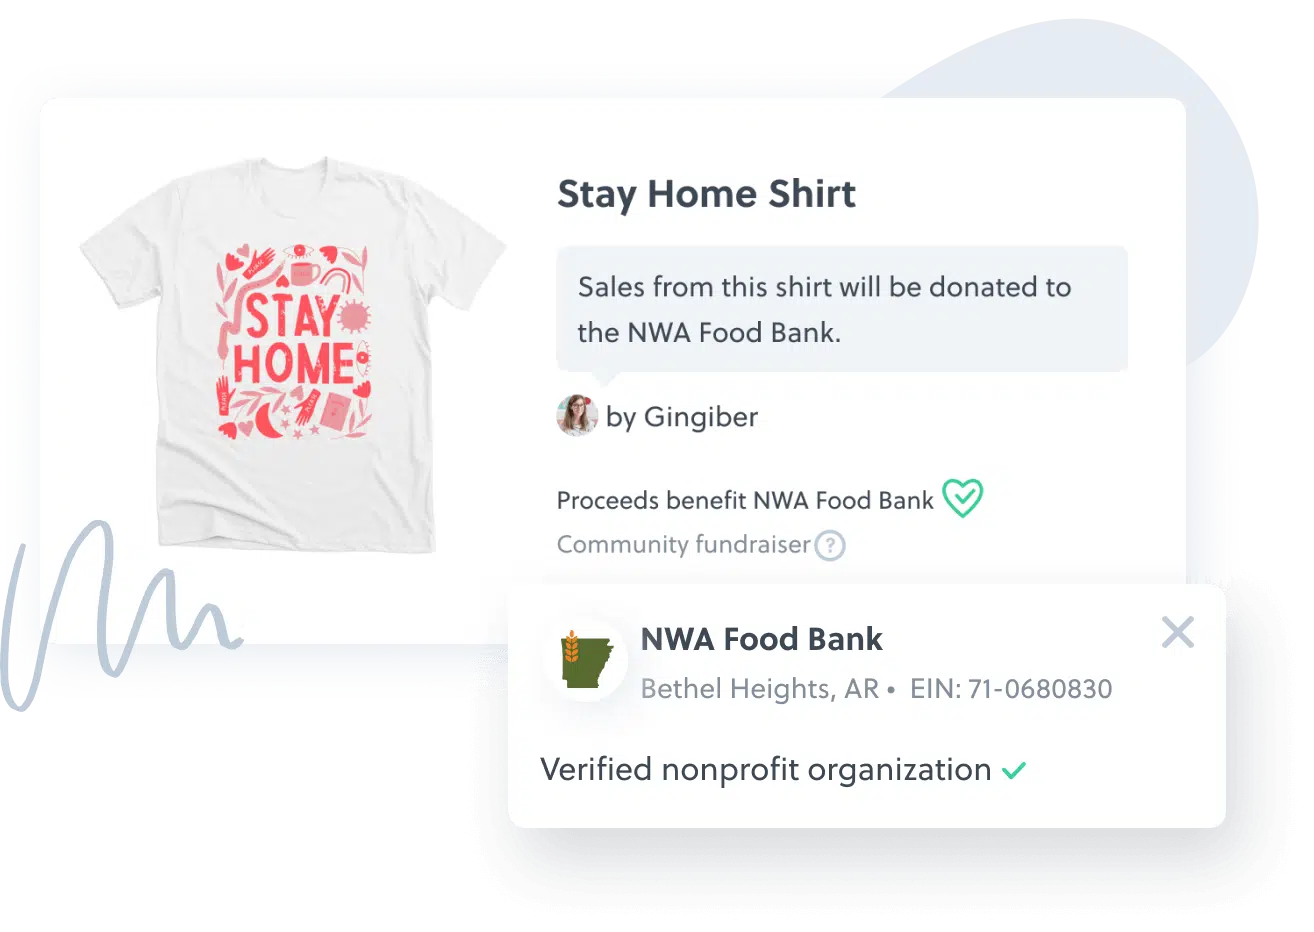  This image shows an example of a campaign on Bonfire’s peer-to-peer fundraising platform.